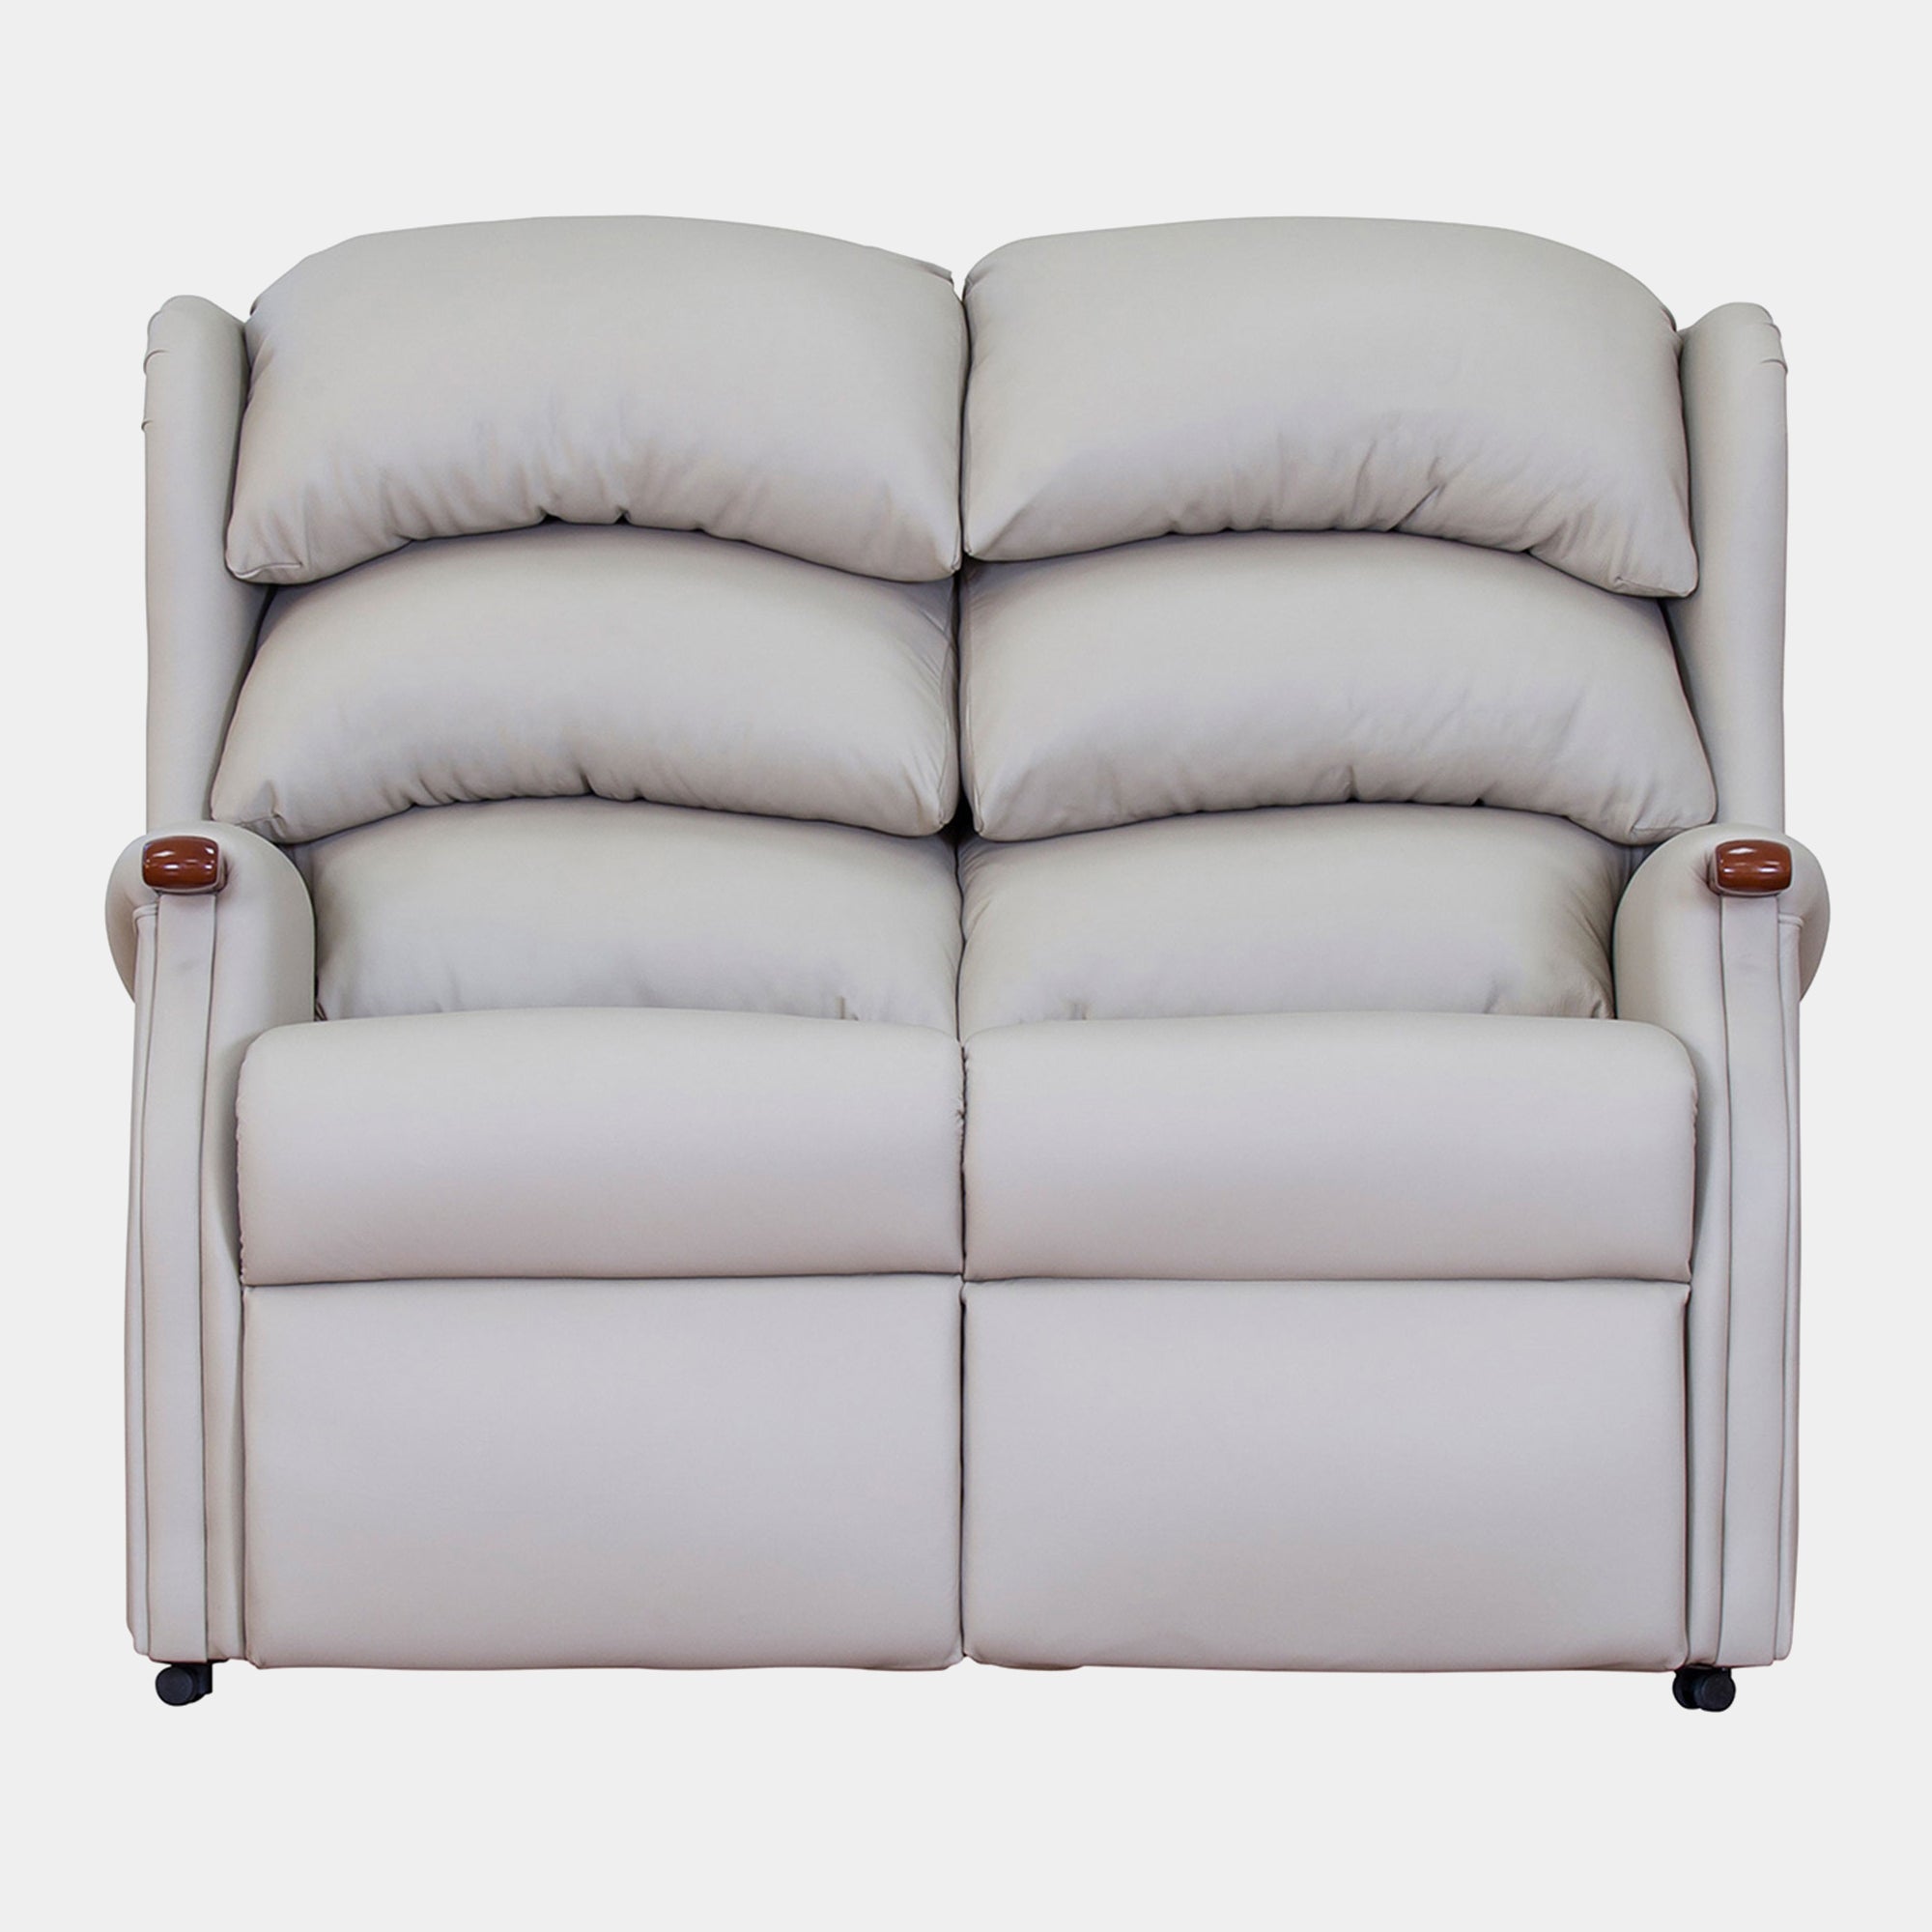 New Woodstock - Fixed 2 Seat Settee In Leather